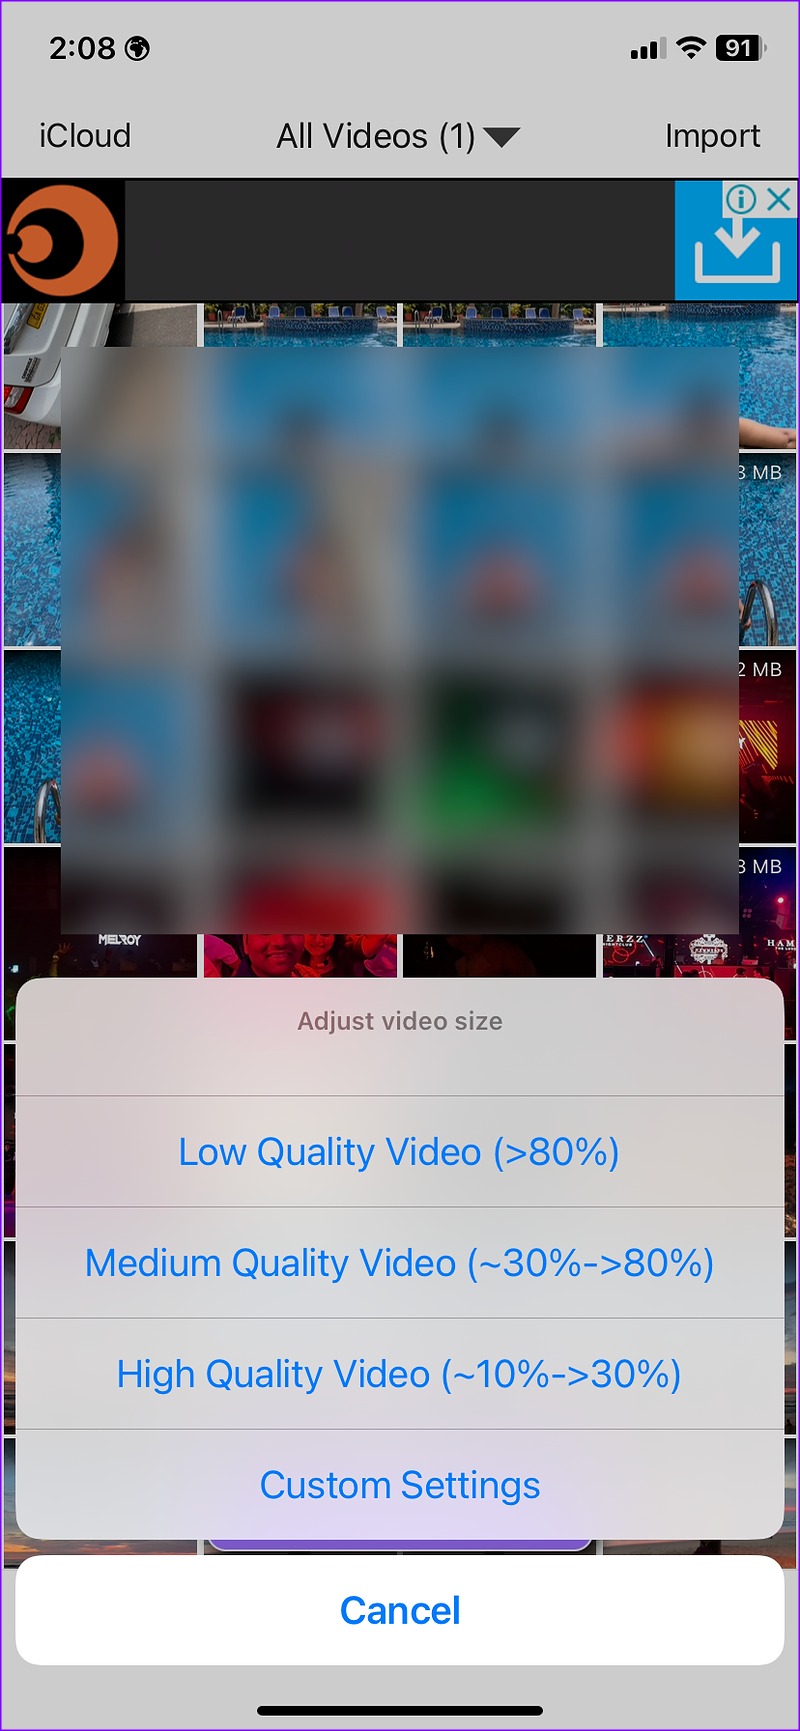 Select Video Size